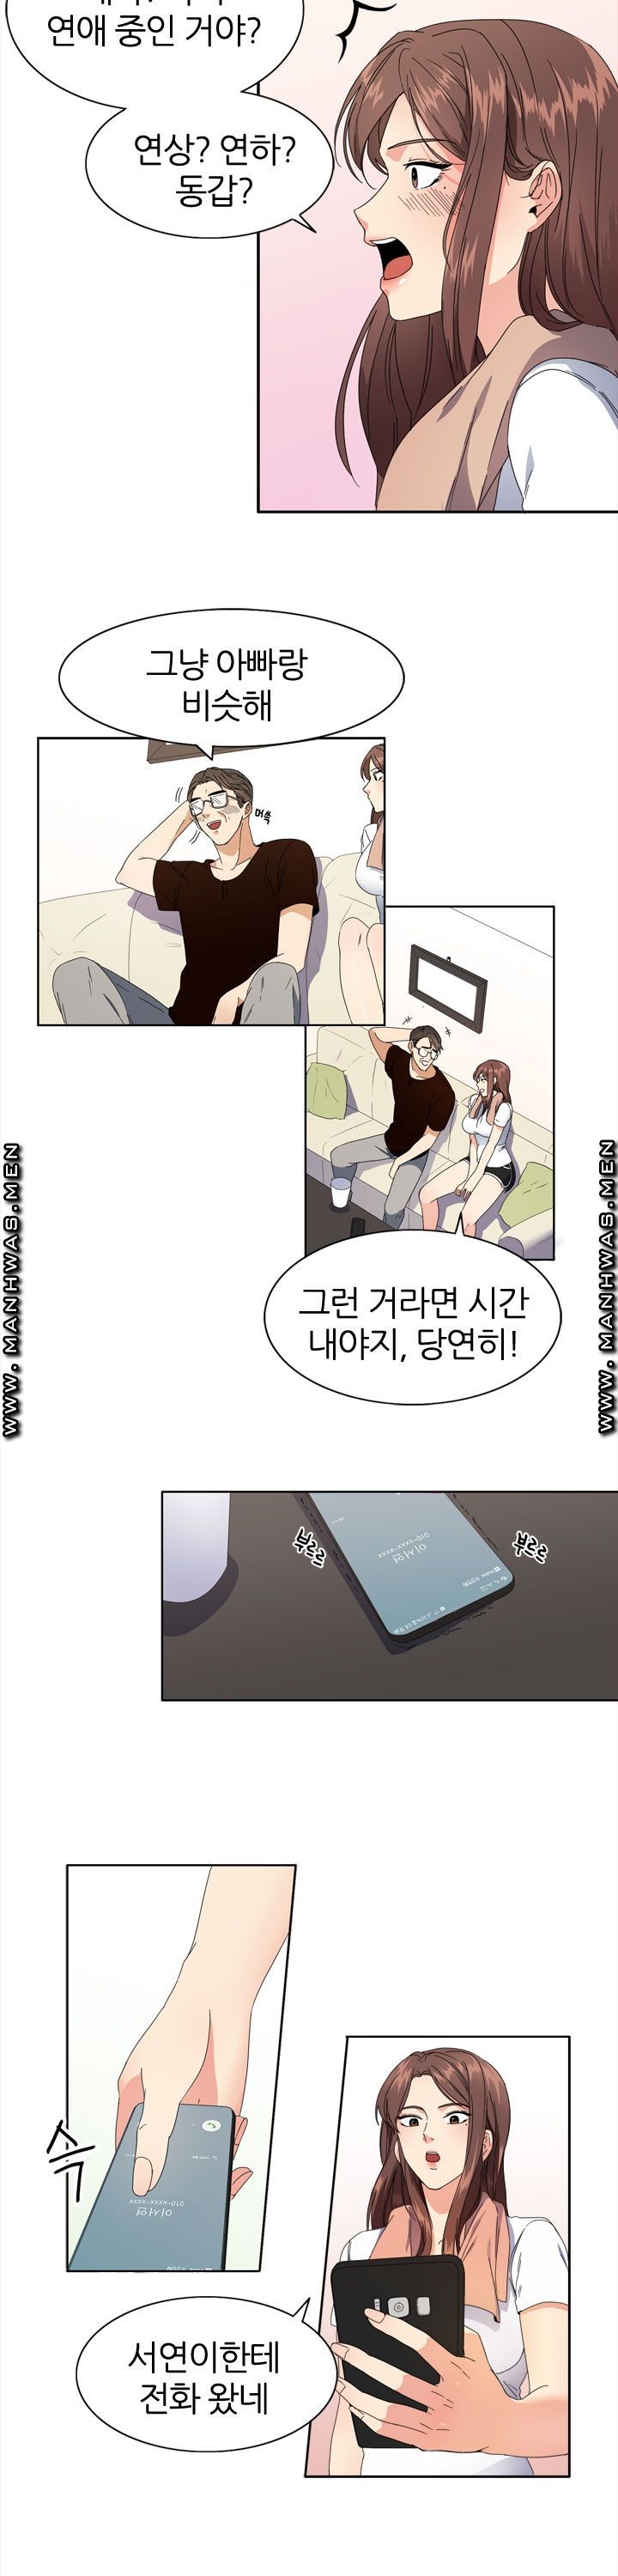 Memory of July Raw - Chapter 2 Page 6